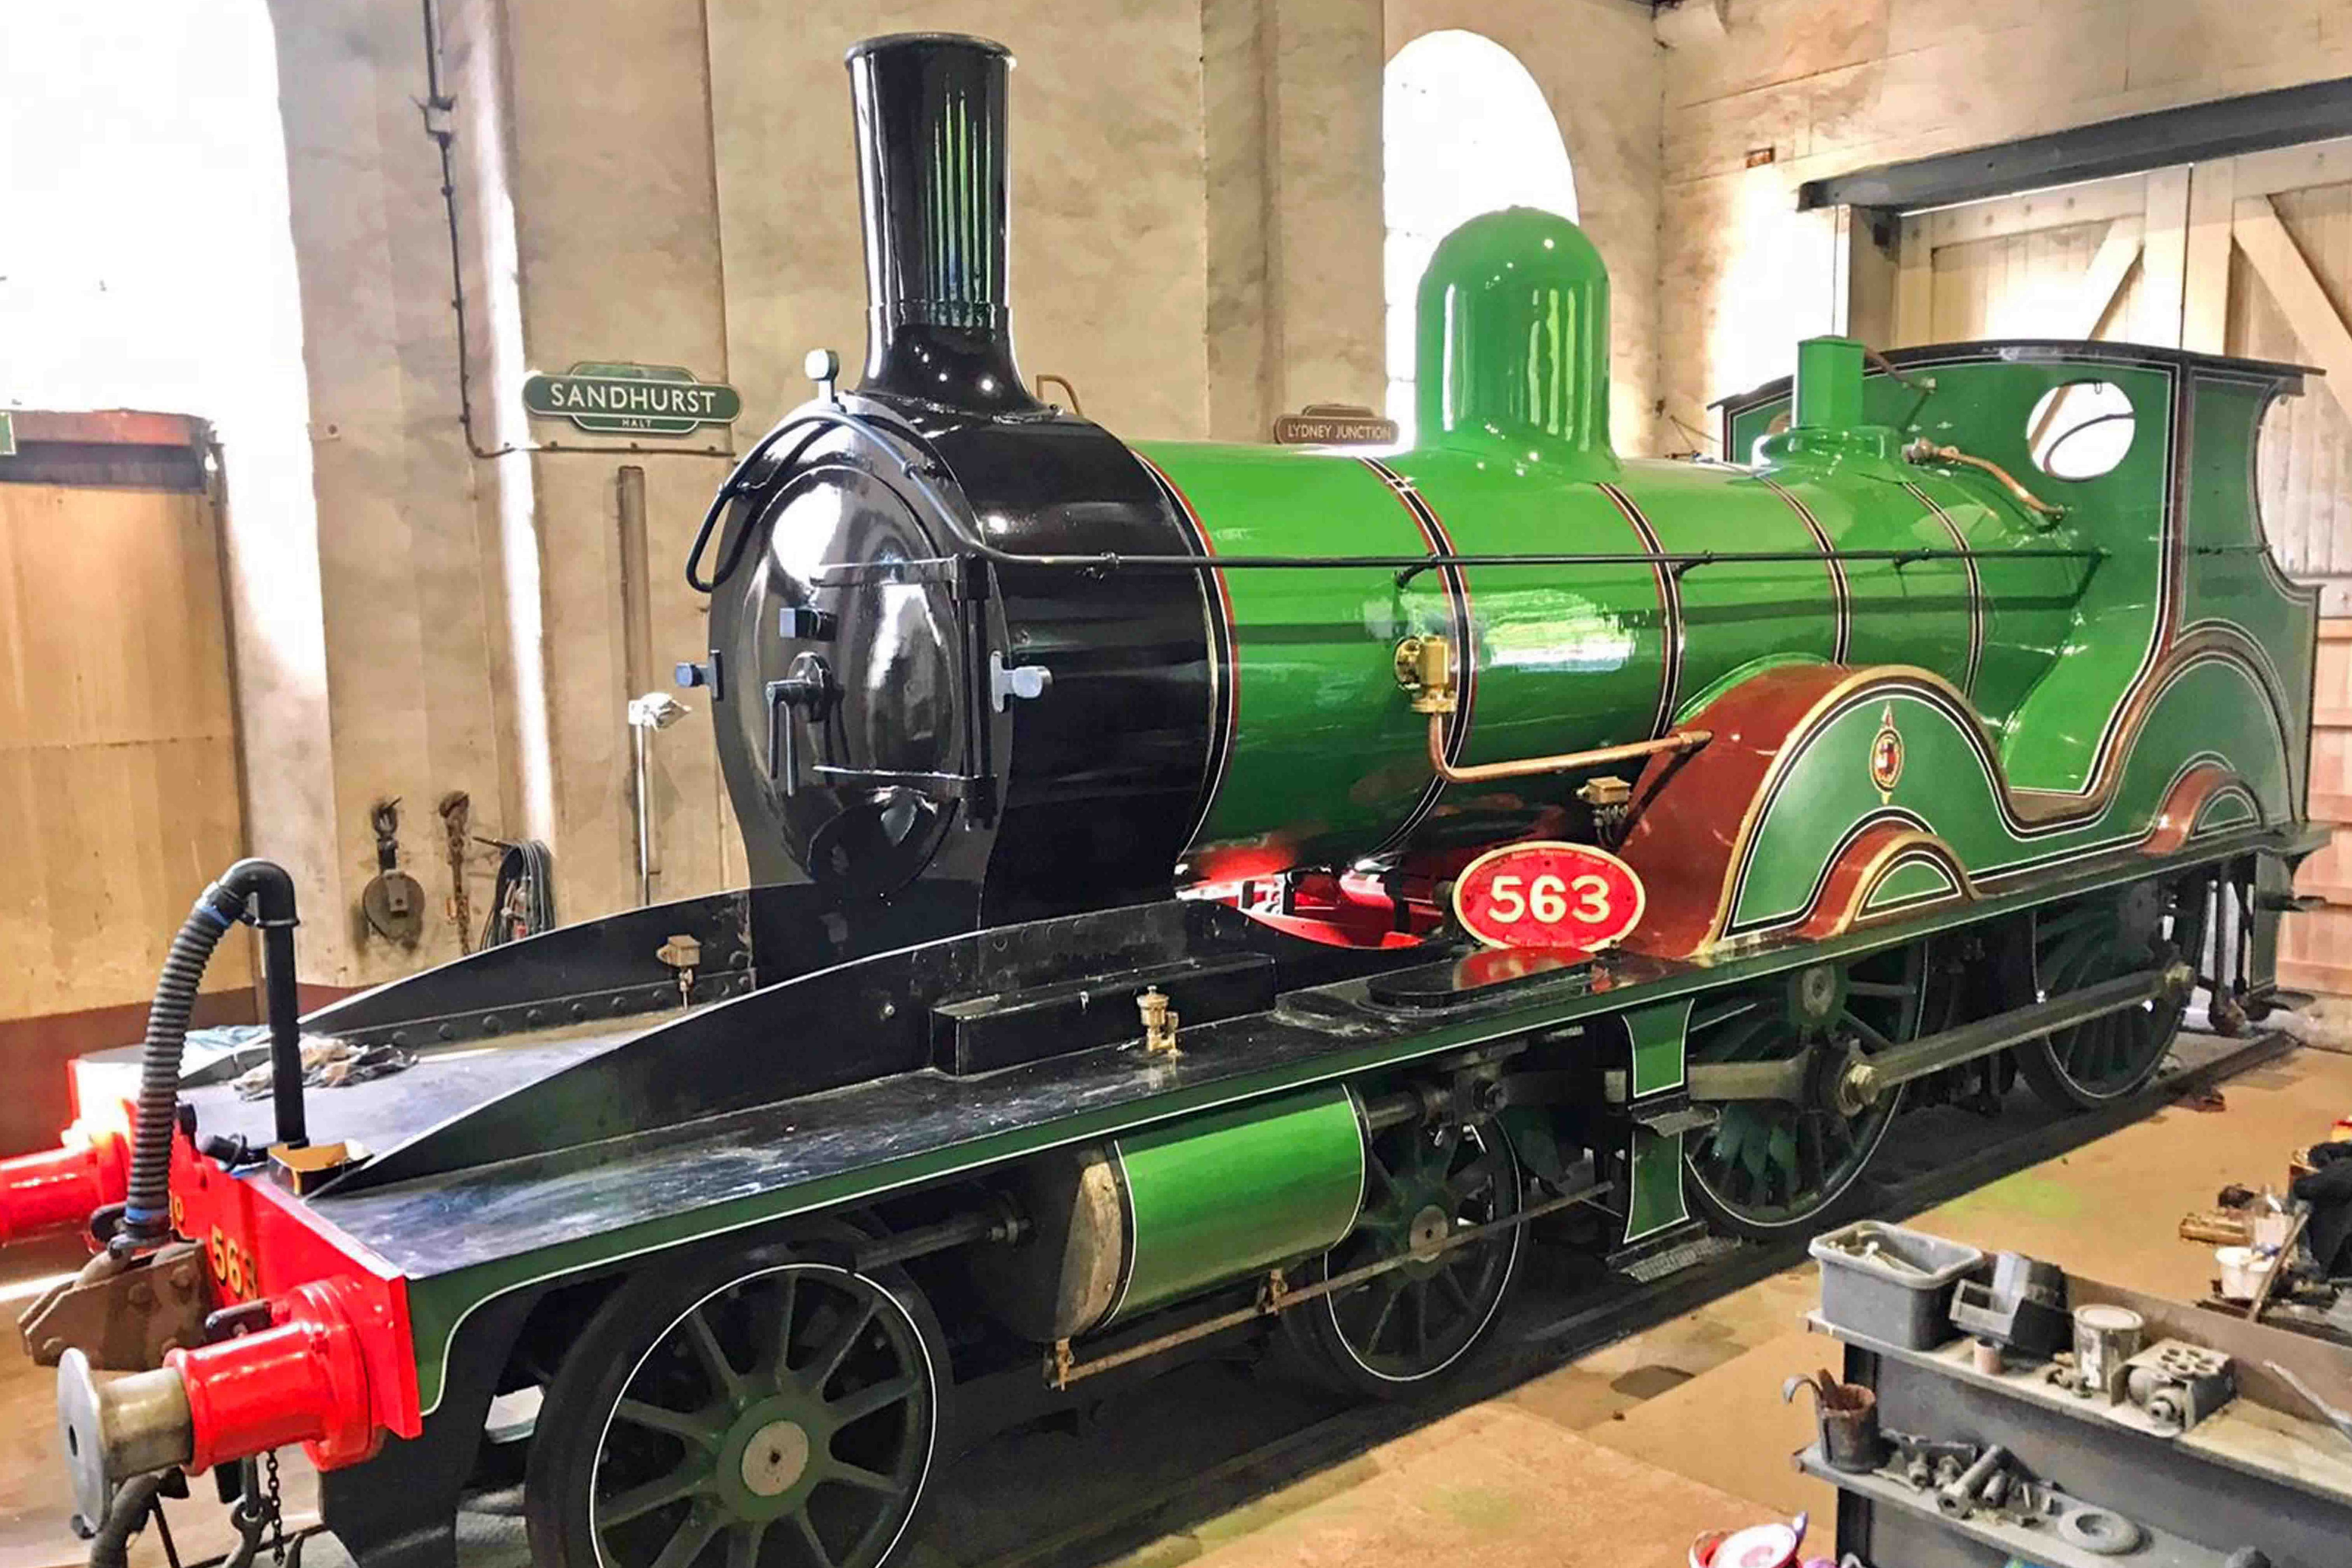 It is hoped restoration work on the locomotive will be completed by the autumn